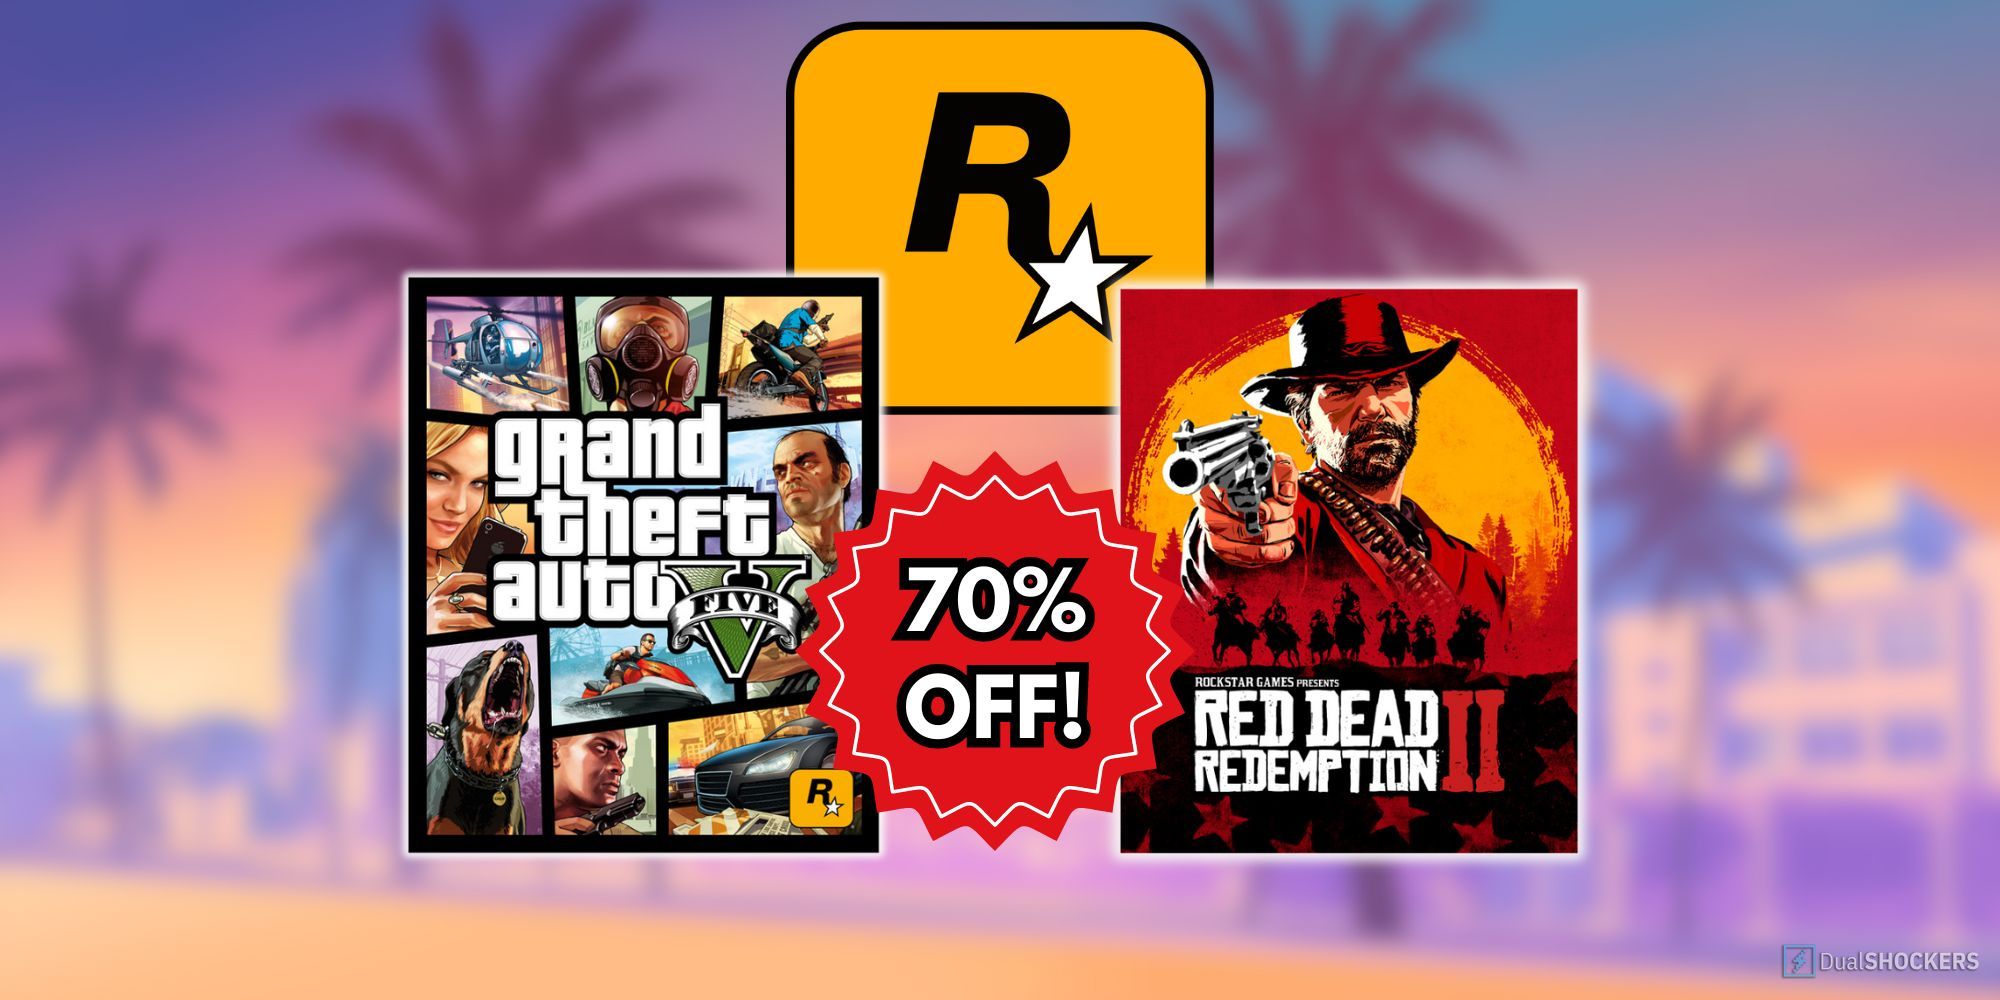 Feature image with a blurred GTA 6 background, the Rockstar logo, a 70% off sale sign and the covers for GTA V and RDR2.